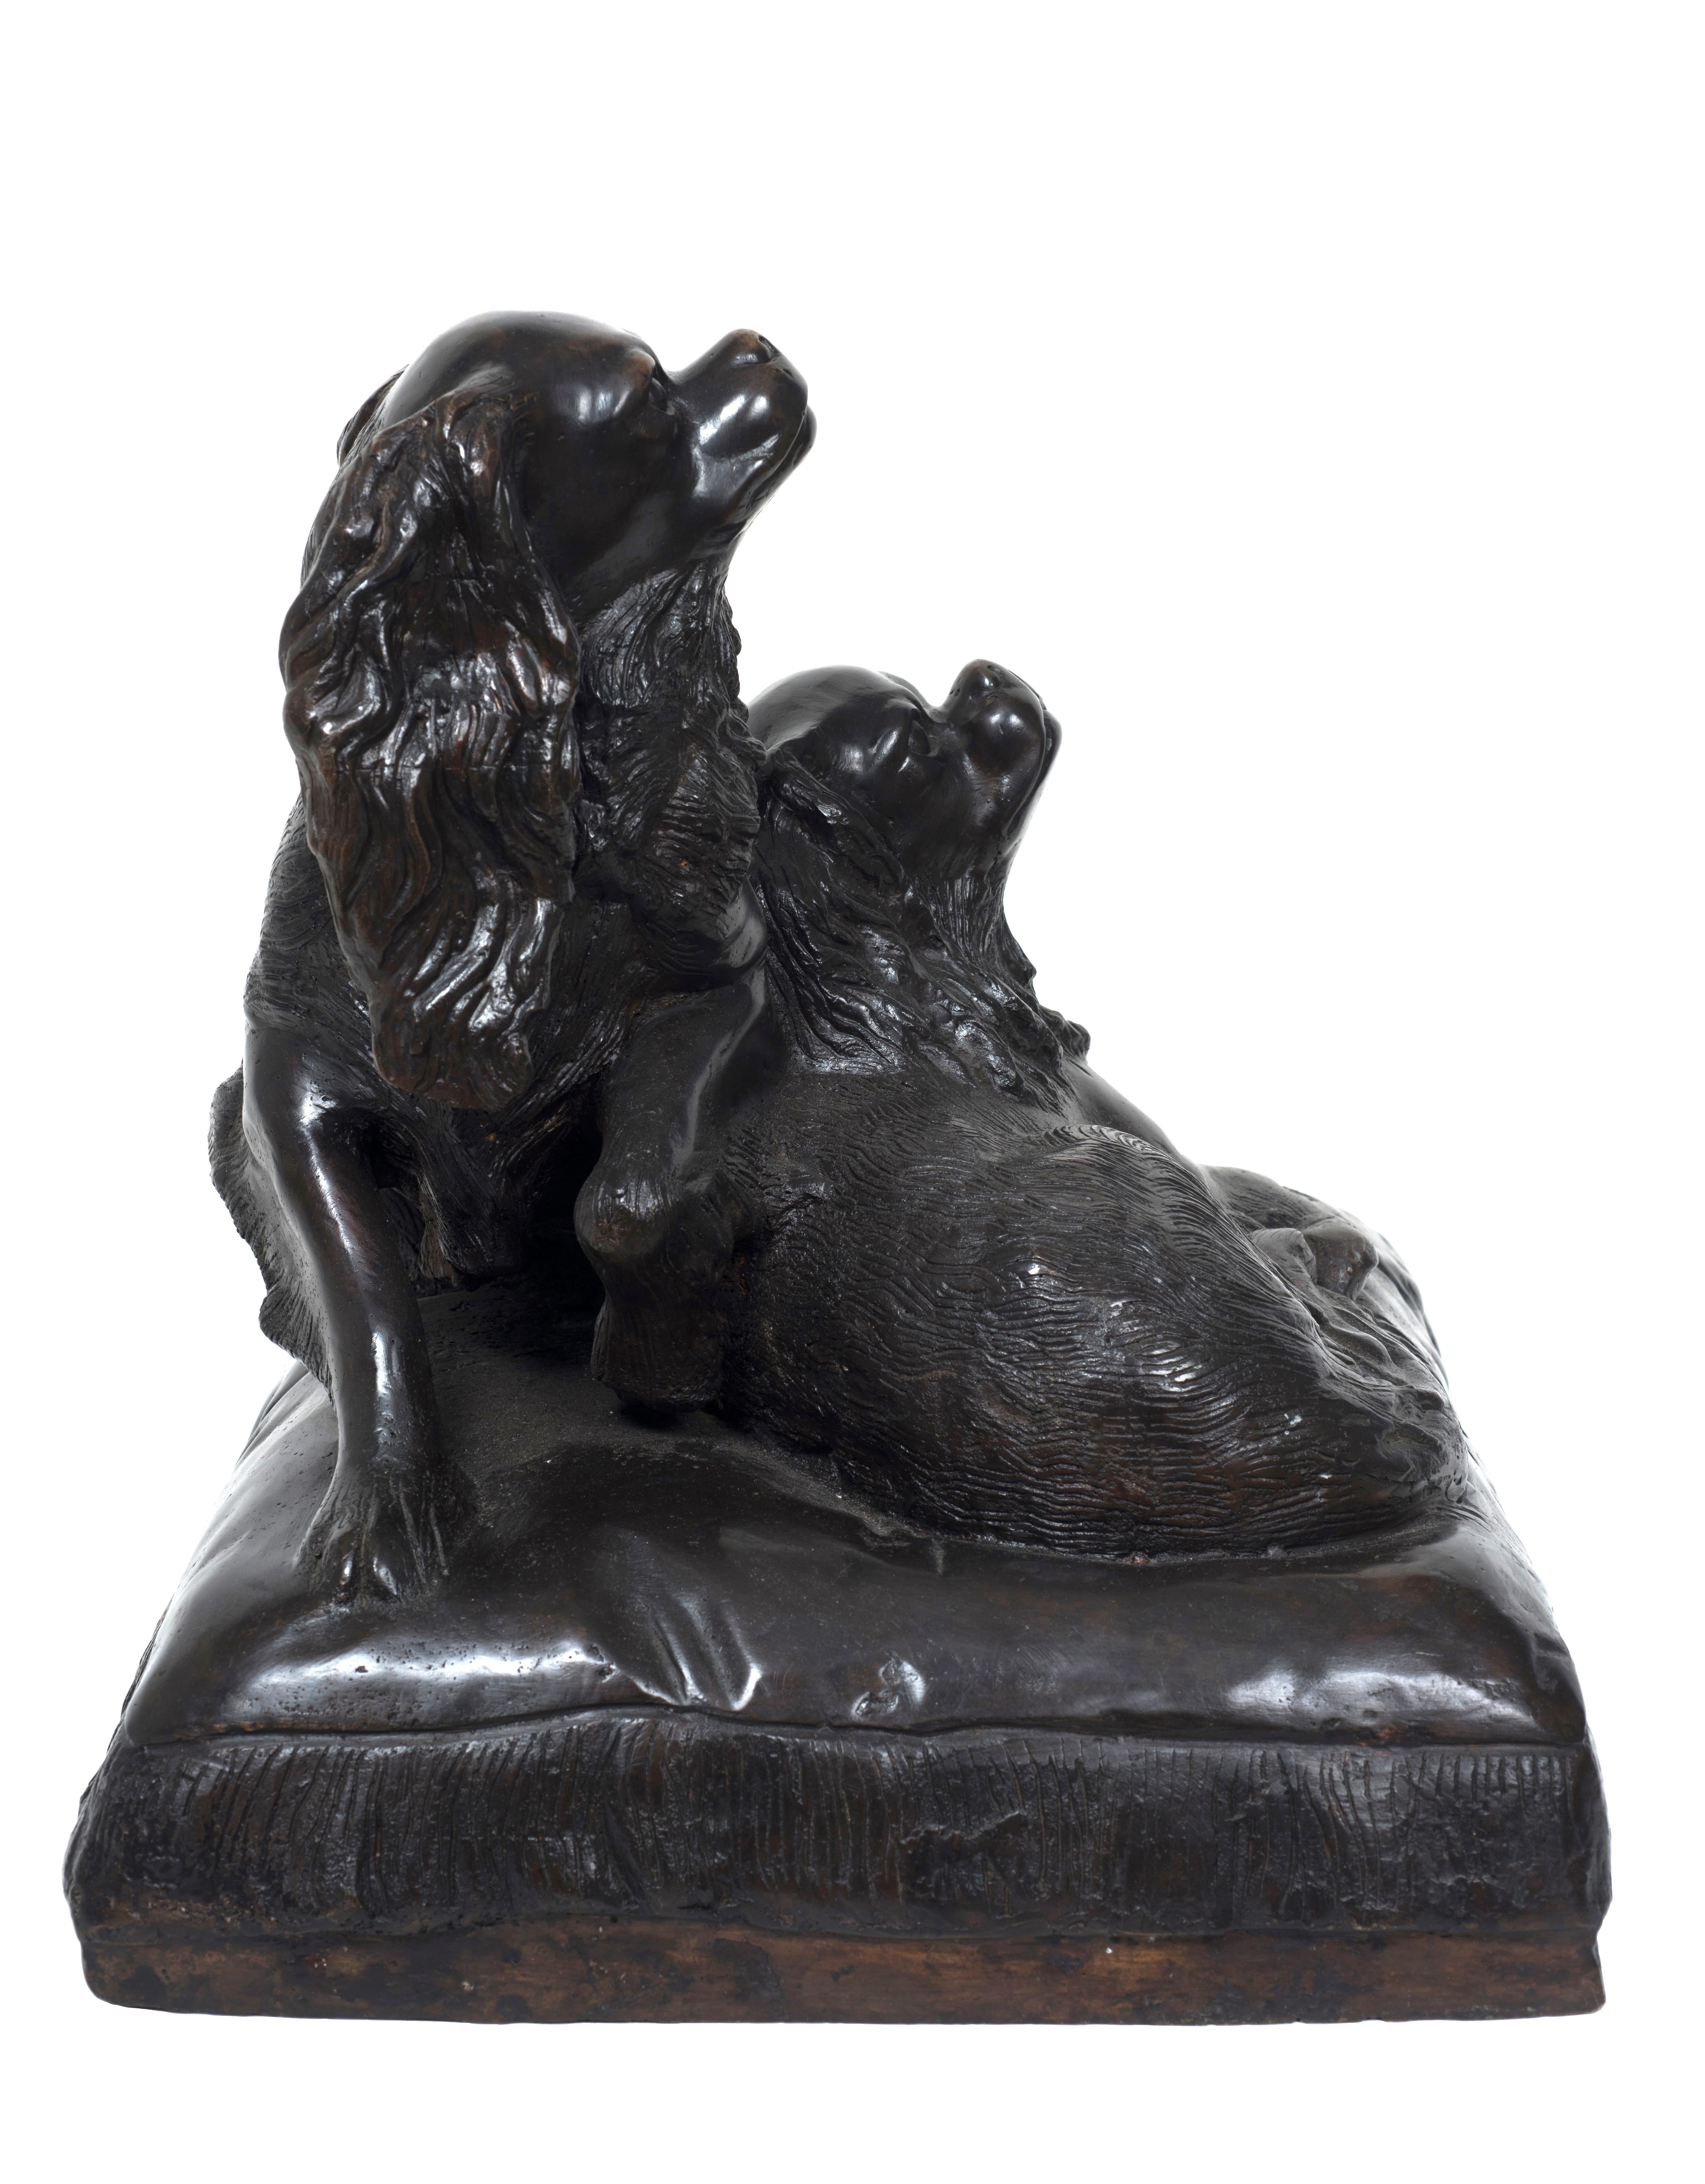 Bronze sculpture representing a pair of Cavalier King Charles Spaniel dogs on a pillow, by French Sculptor Charles Valton (Pau 1851-Paris 1918).
Group in bronze lost wax casting, excellent conditions.
Signed on pillow: C. Valton.

This artwork is